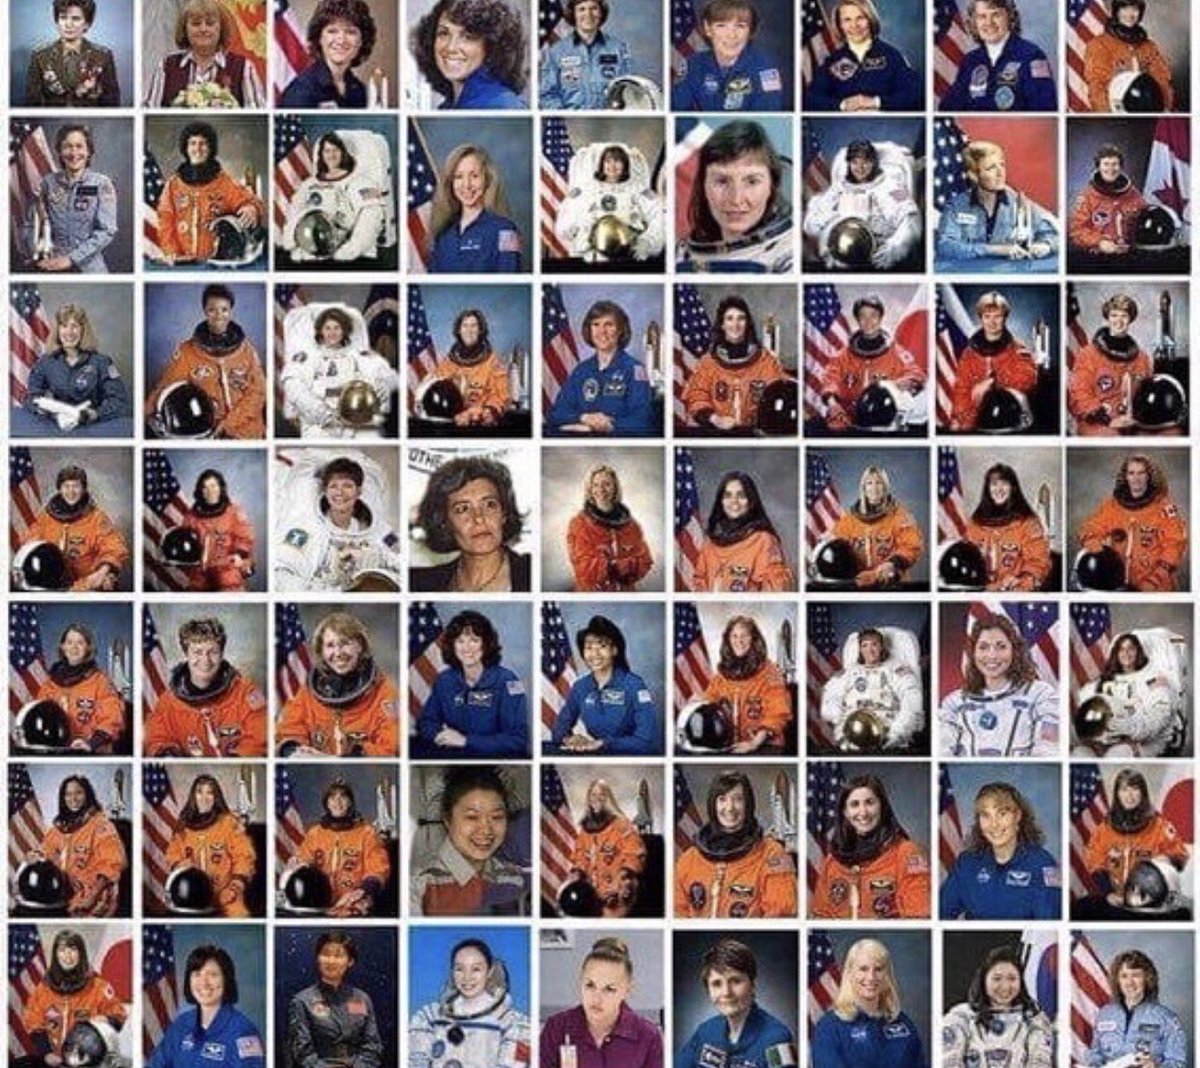 RT AstronautAbby: A shout out to the amazing women who have lead the path for all women as #astronauts for #womenshistorymonth ! With  60 of the 537 astronauts who have been to space being women we have work left do. Let’s keep advocating for #womeninste…